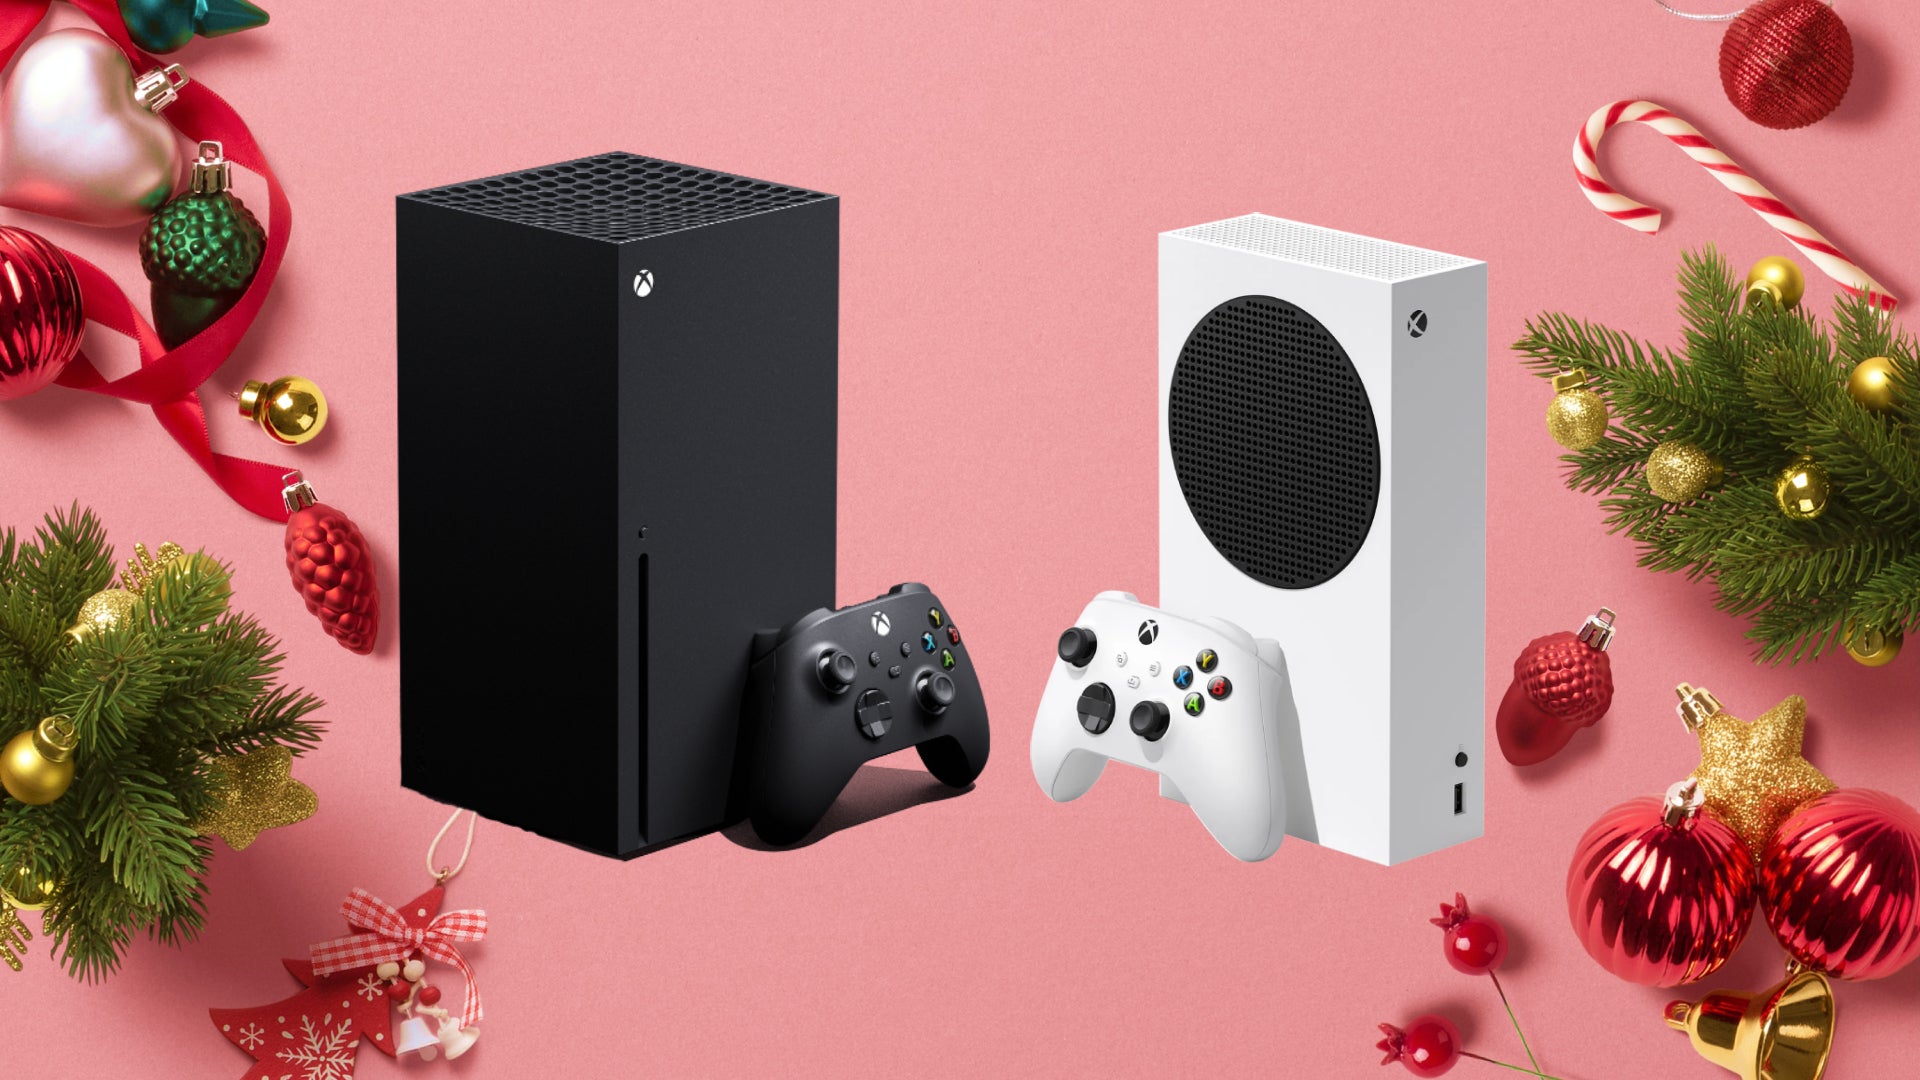 These Christmas discounts have made the Xbox Series X and S 